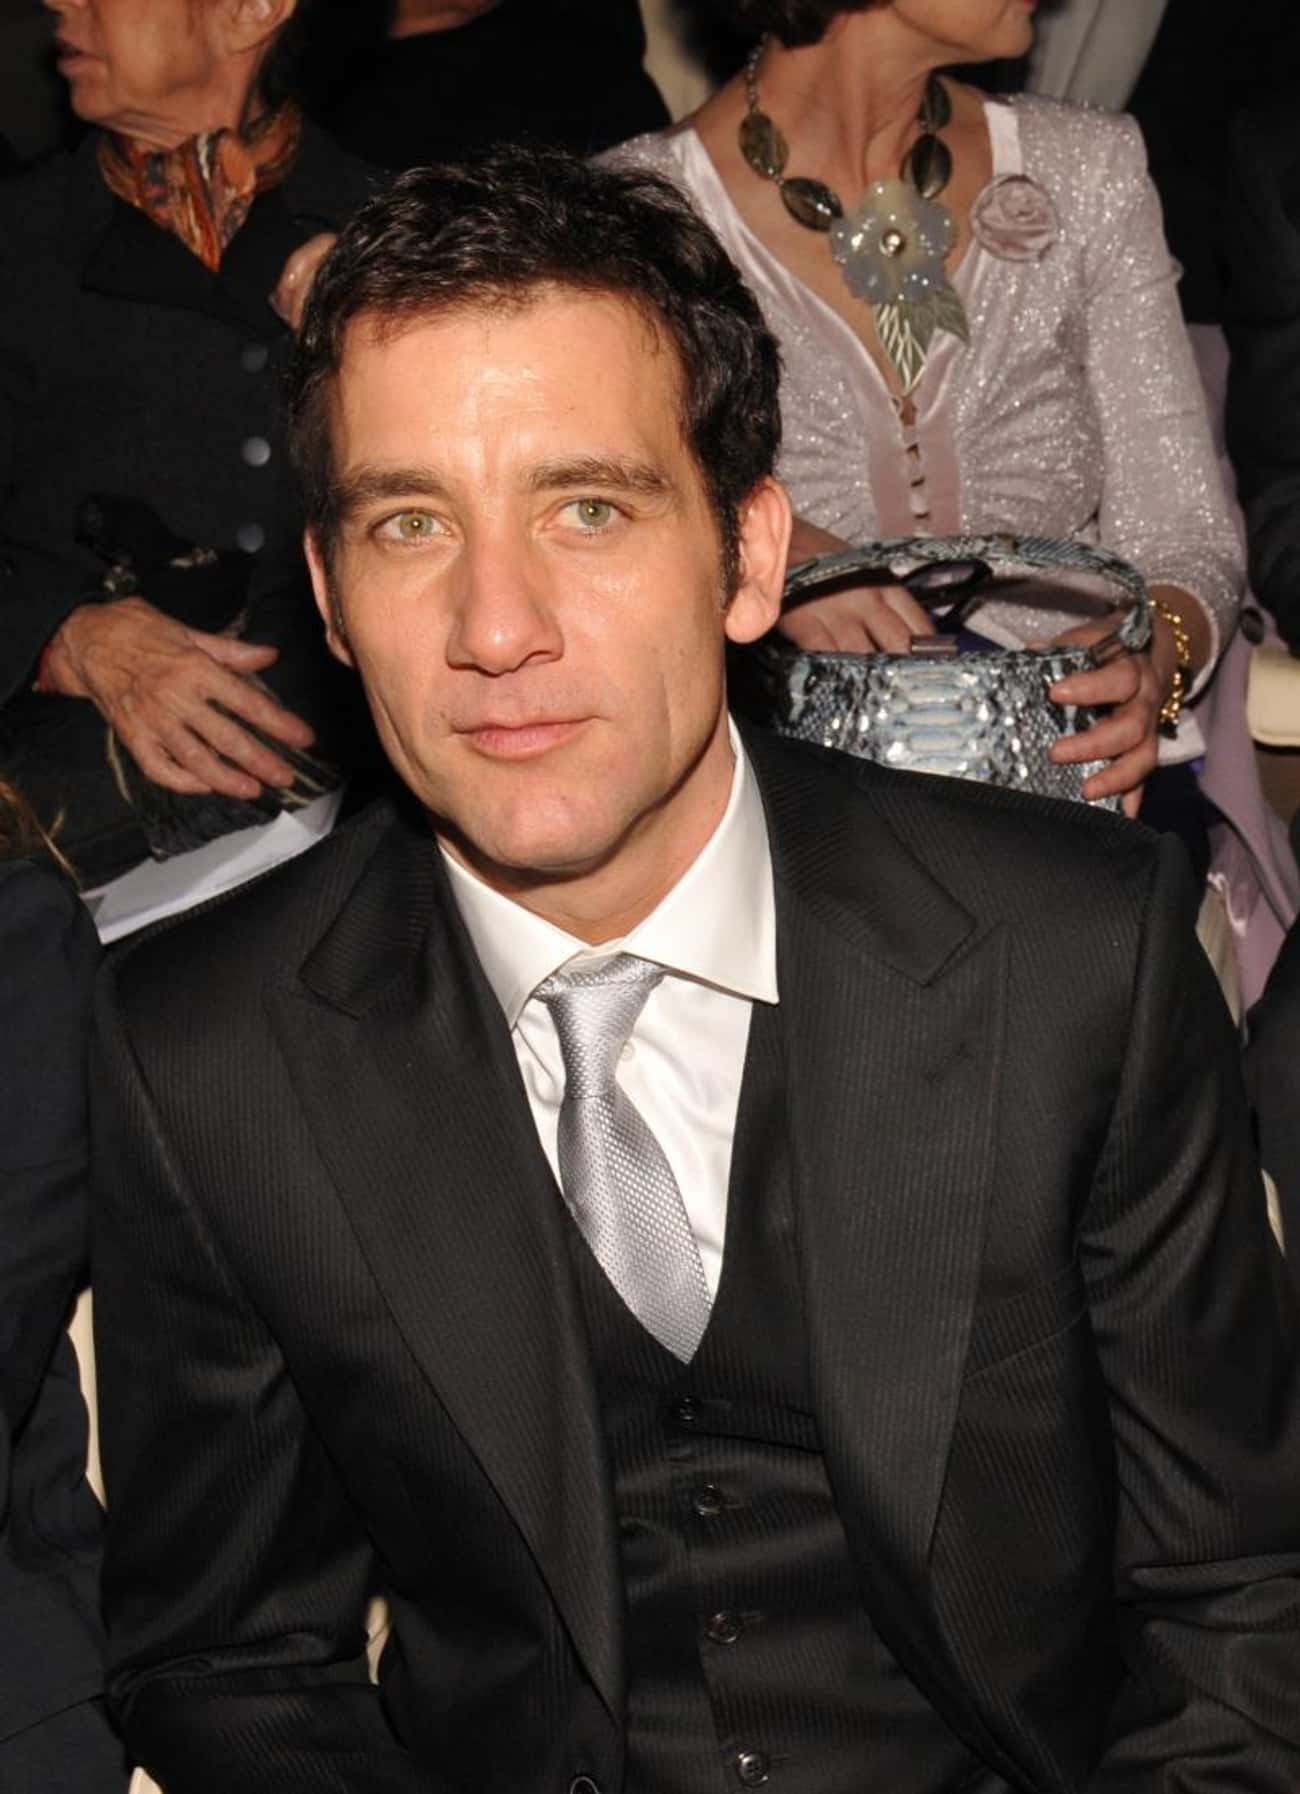 Clive Owen in Black Vested Tuxedo and Gray Tie